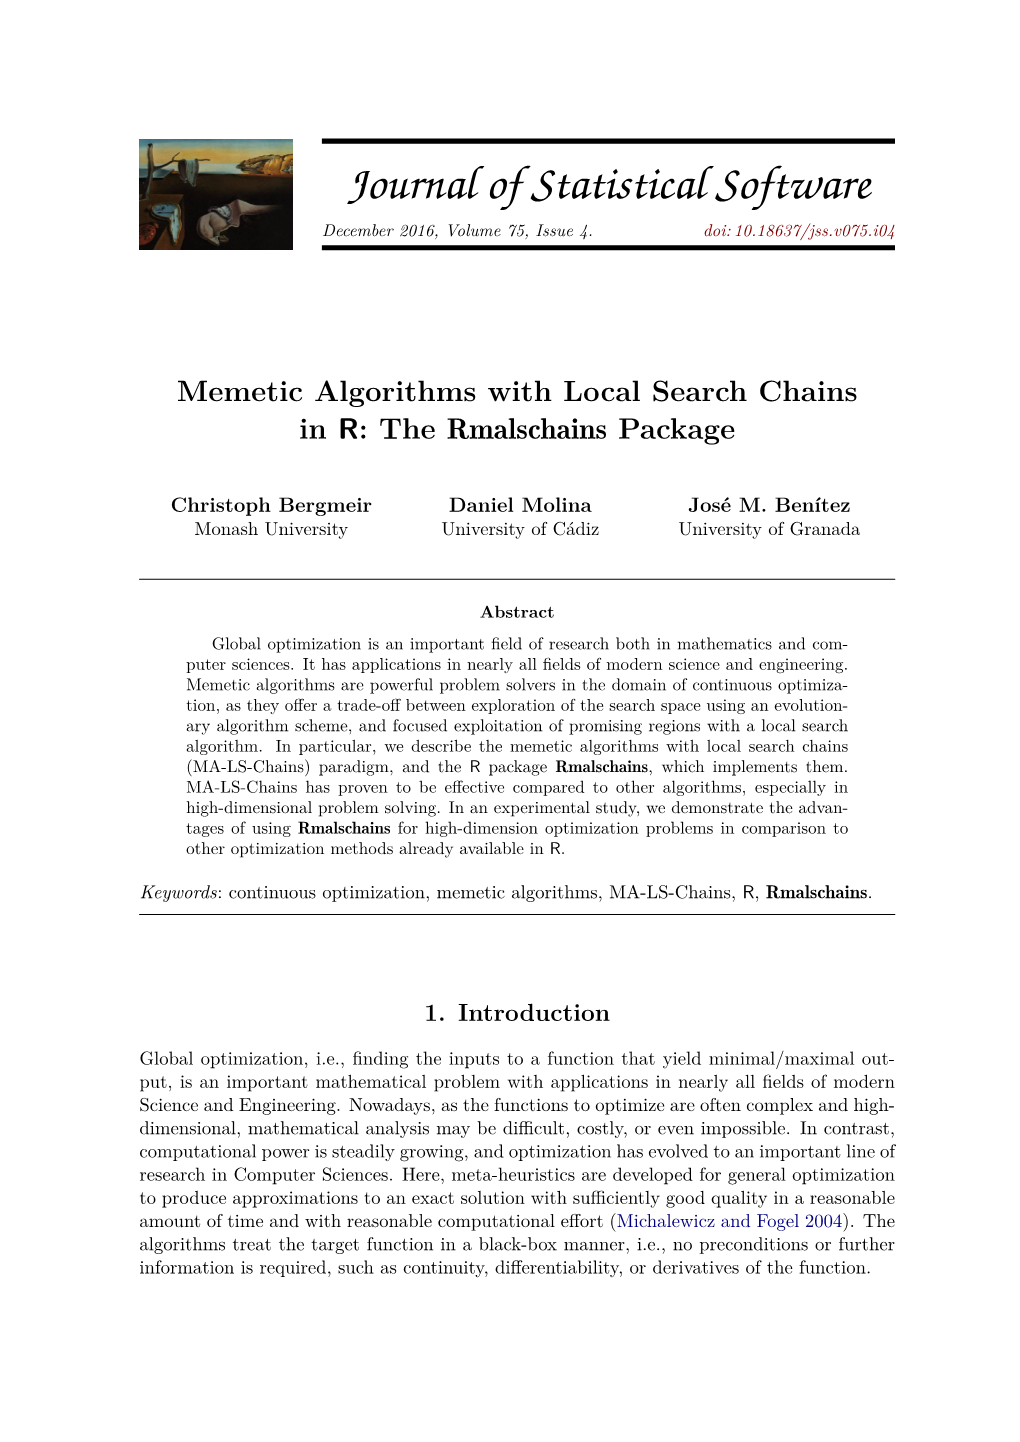 Memetic Algorithms with Local Search Chains in R: the Rmalschains Package